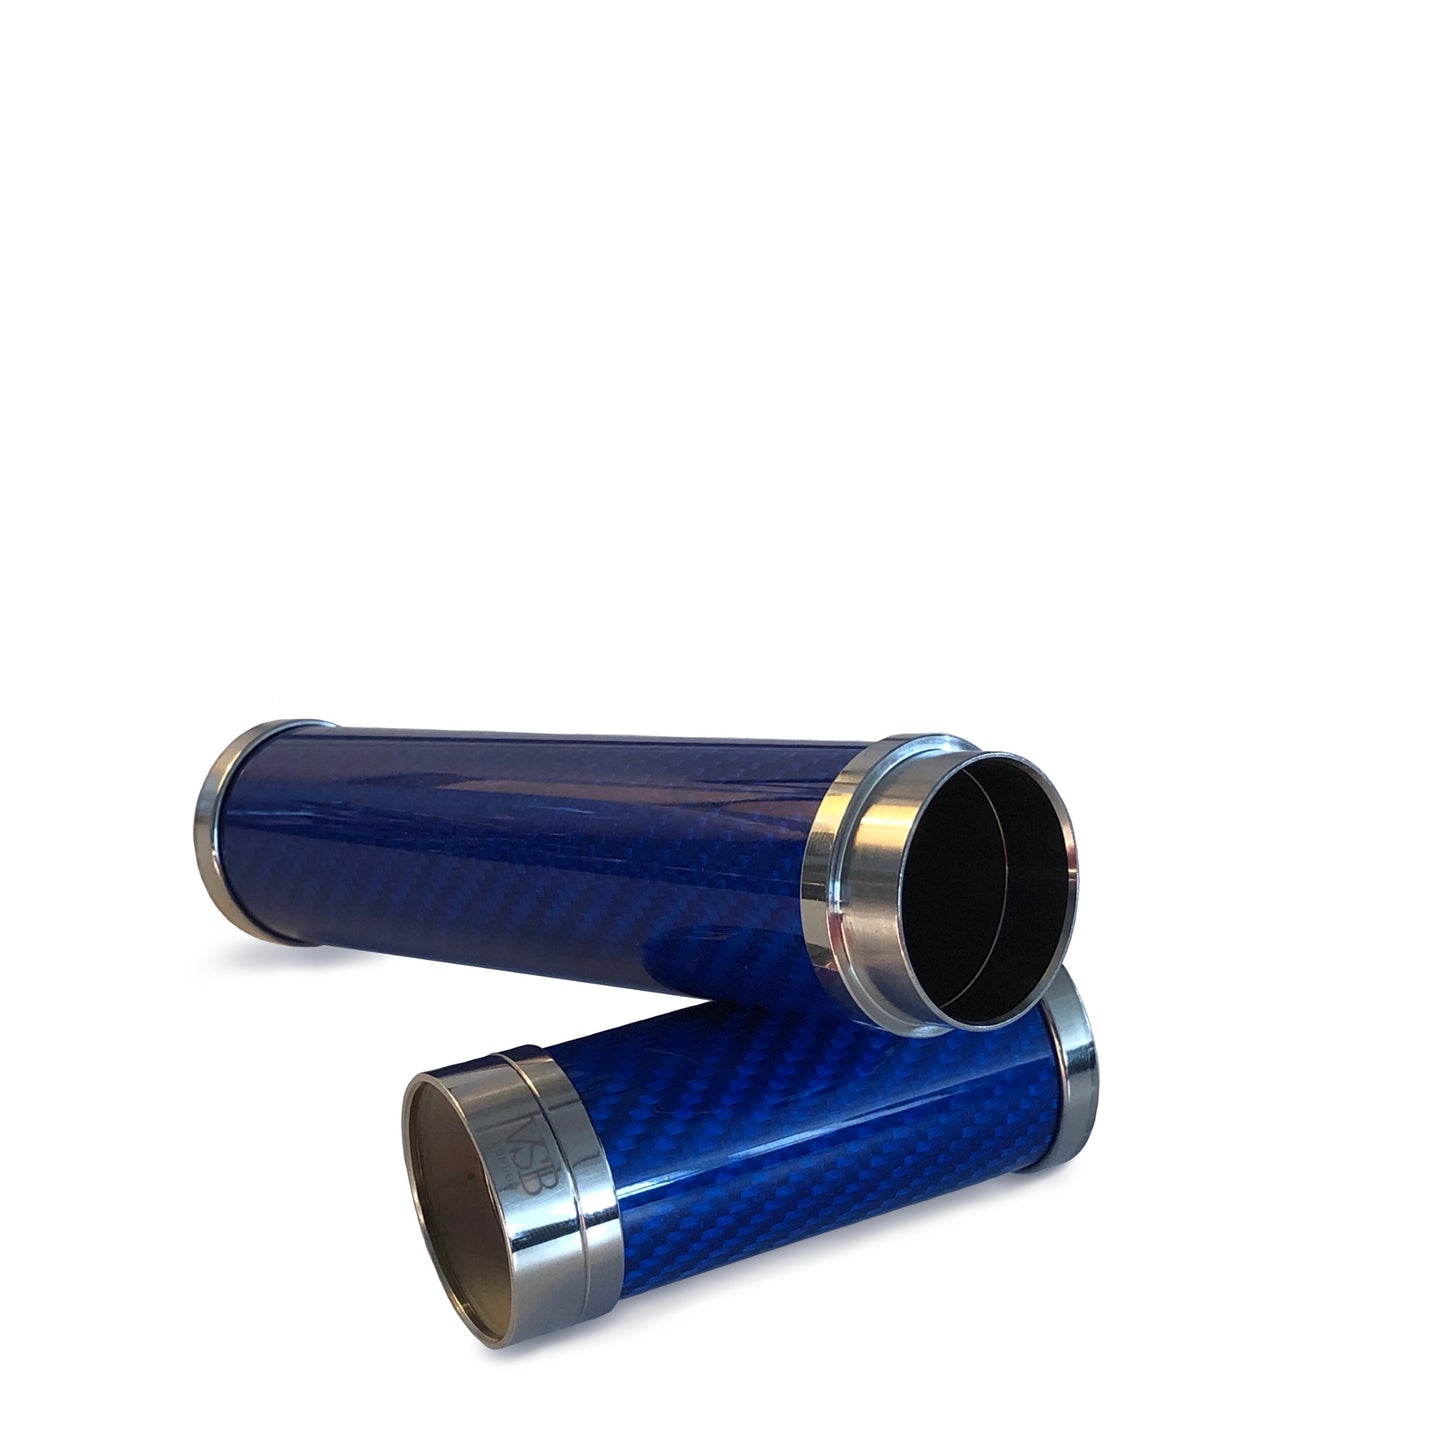 VSB London carbon fibre and stainless steel cigar tube in blue